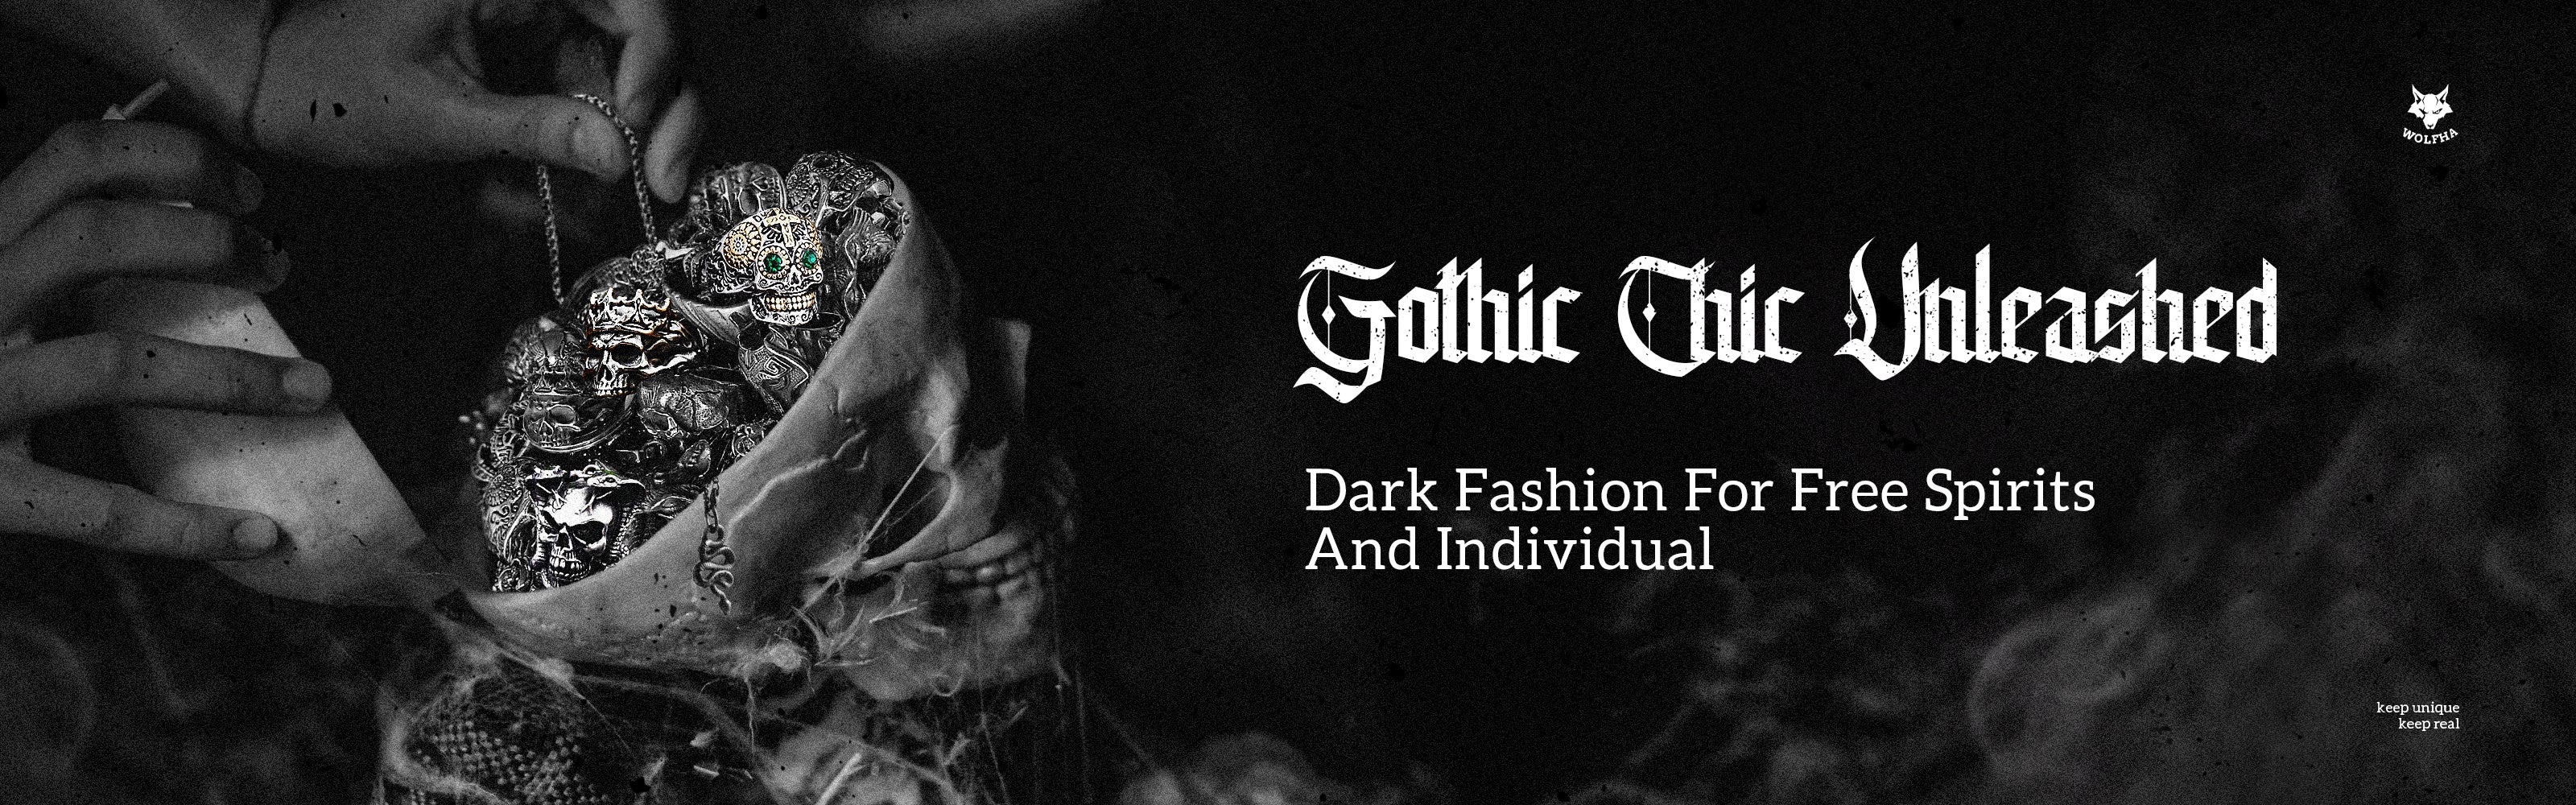 wolfha_homepage_banner_gothic_chic_unleashed_dark_fashion_for_free_spirits_and_individual